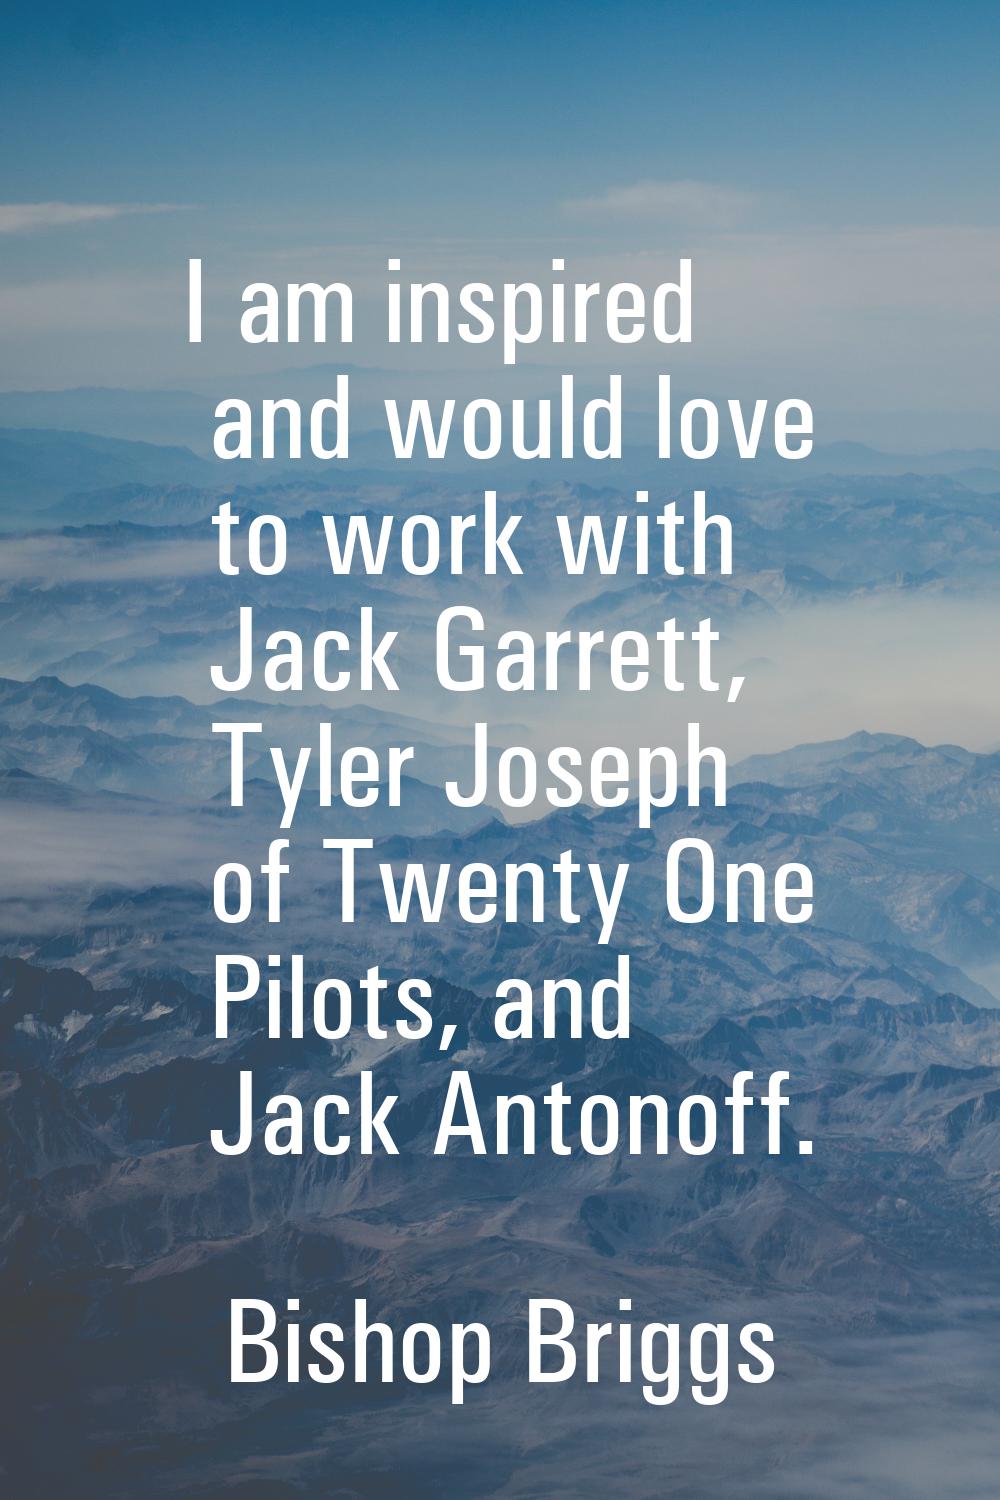 I am inspired and would love to work with Jack Garrett, Tyler Joseph of Twenty One Pilots, and Jack